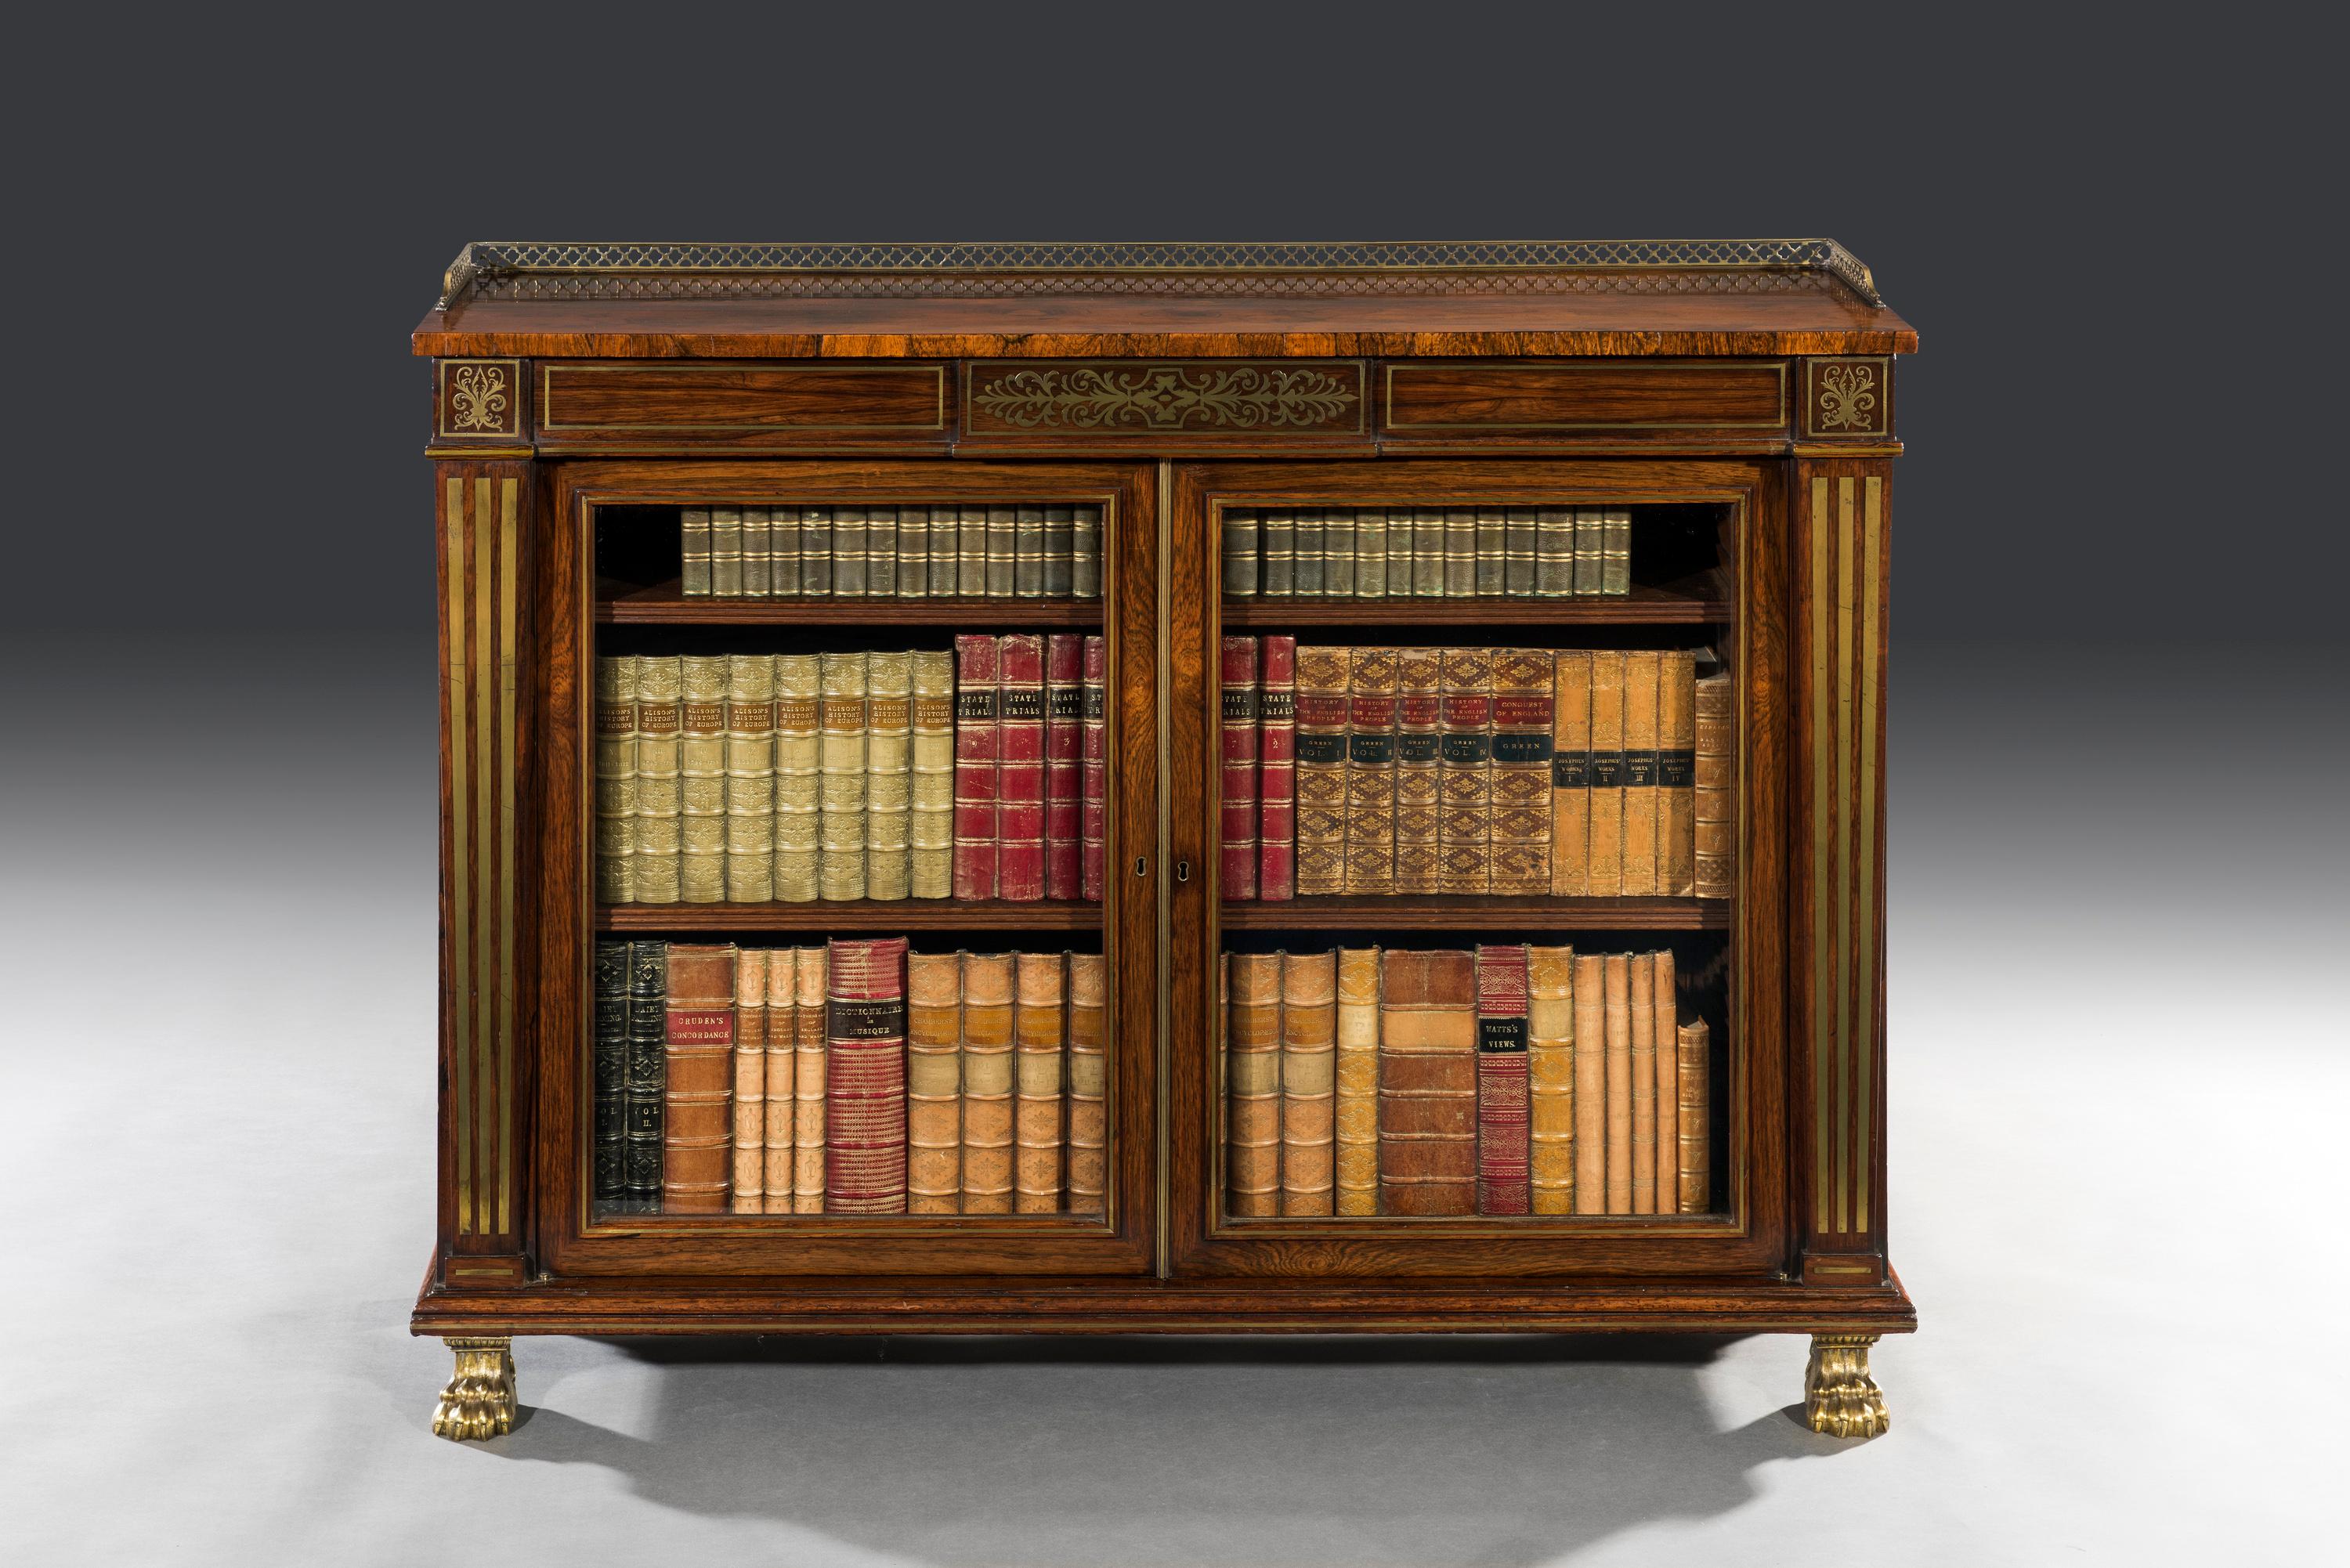 The highly figured brass-mounted rosewood rectangular top above a brass inlaid and brass strung frieze sits above glazed rosewood brass strung doors and flanked by brass fluted inlaid capitals. The glazed bookcase stands on its original feet with